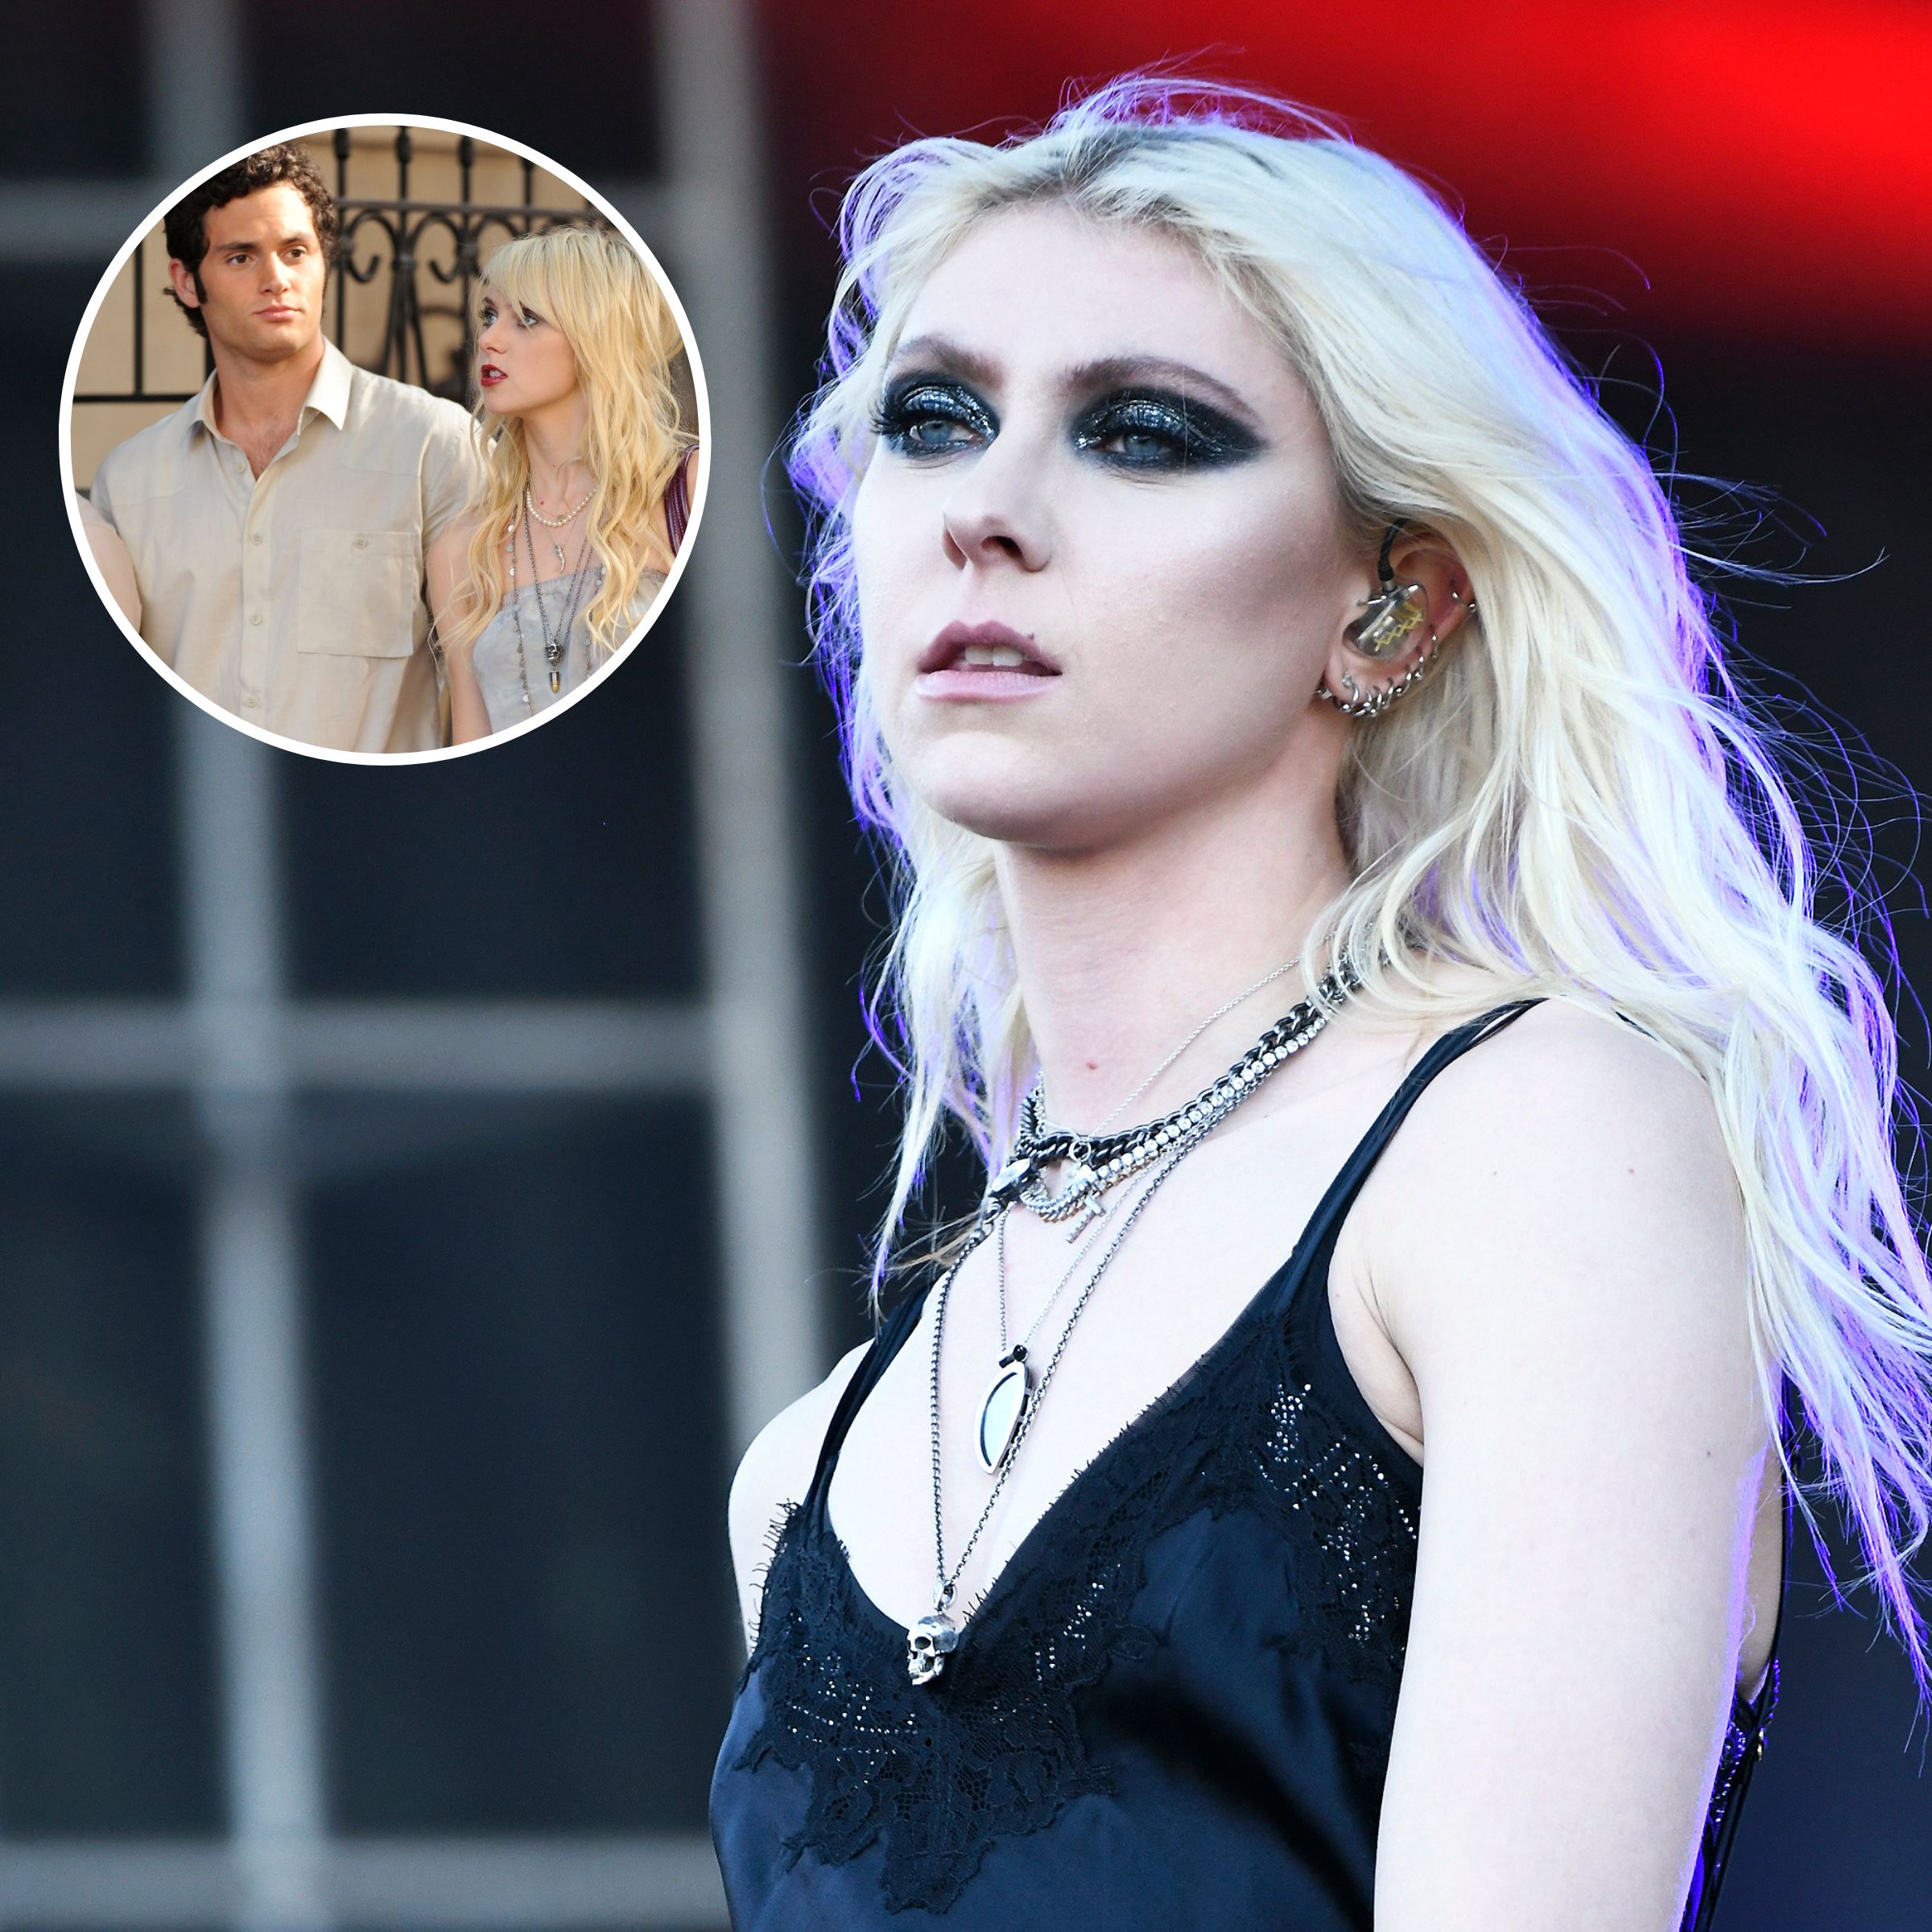 Taylor Momsen's Exit From 'Gossip Girl': Why She Left